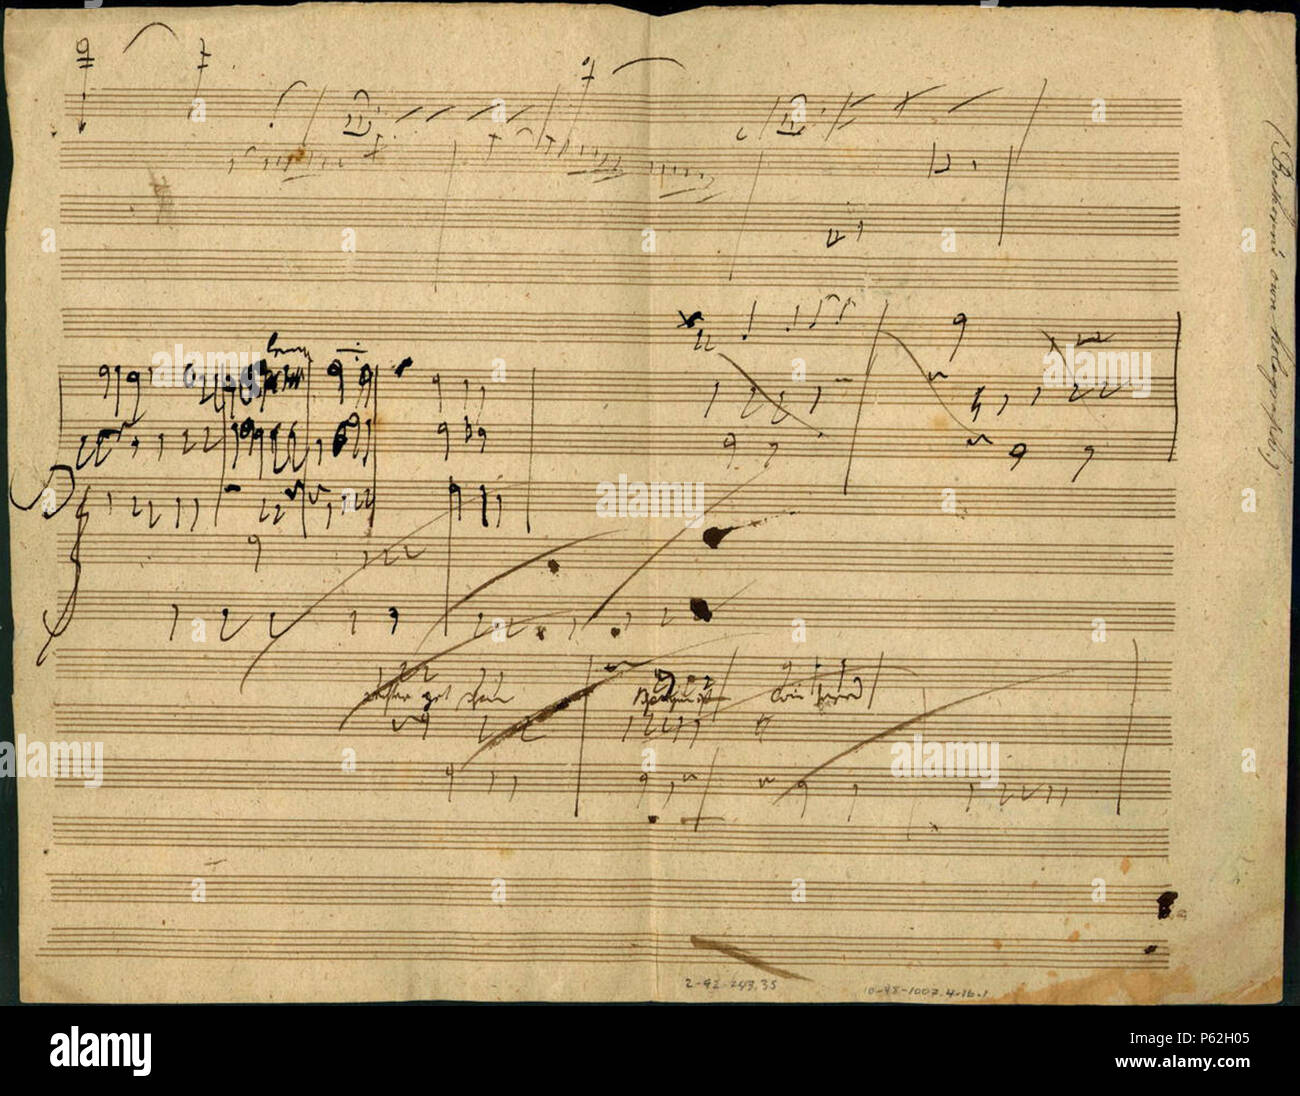 N/A. Piano Sonata in A Major, op. 101, Allegro: manuscript sketch in  Beethoven's handwriting. 1816. Ludwig van Beethoven (1770–1827) Alternative names  Beethoven Description German composer and pianist He was a crucial figure